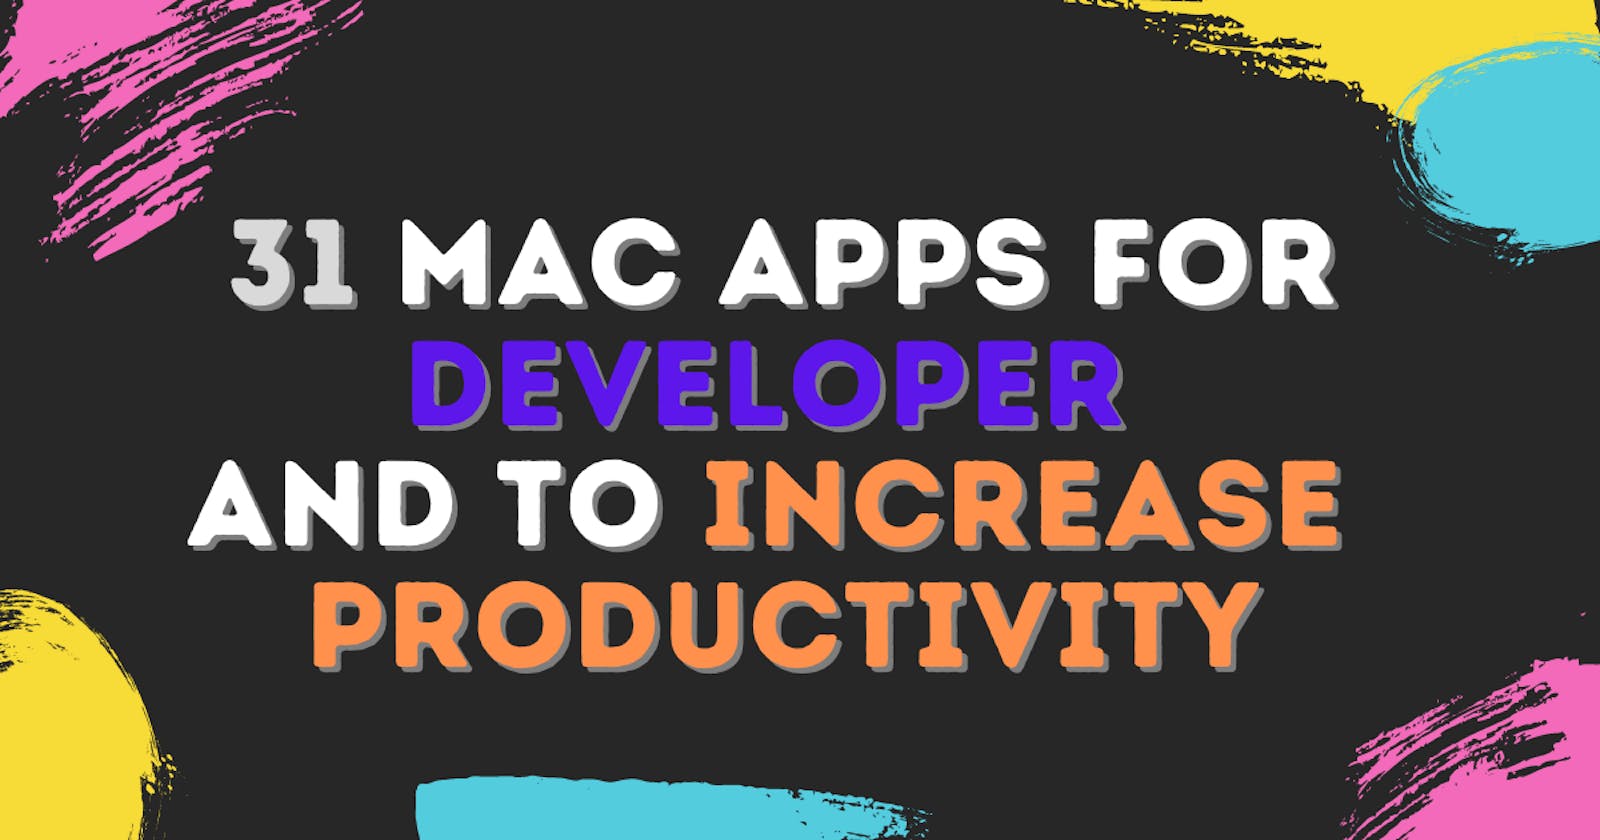 How to Promote Productivity Apps